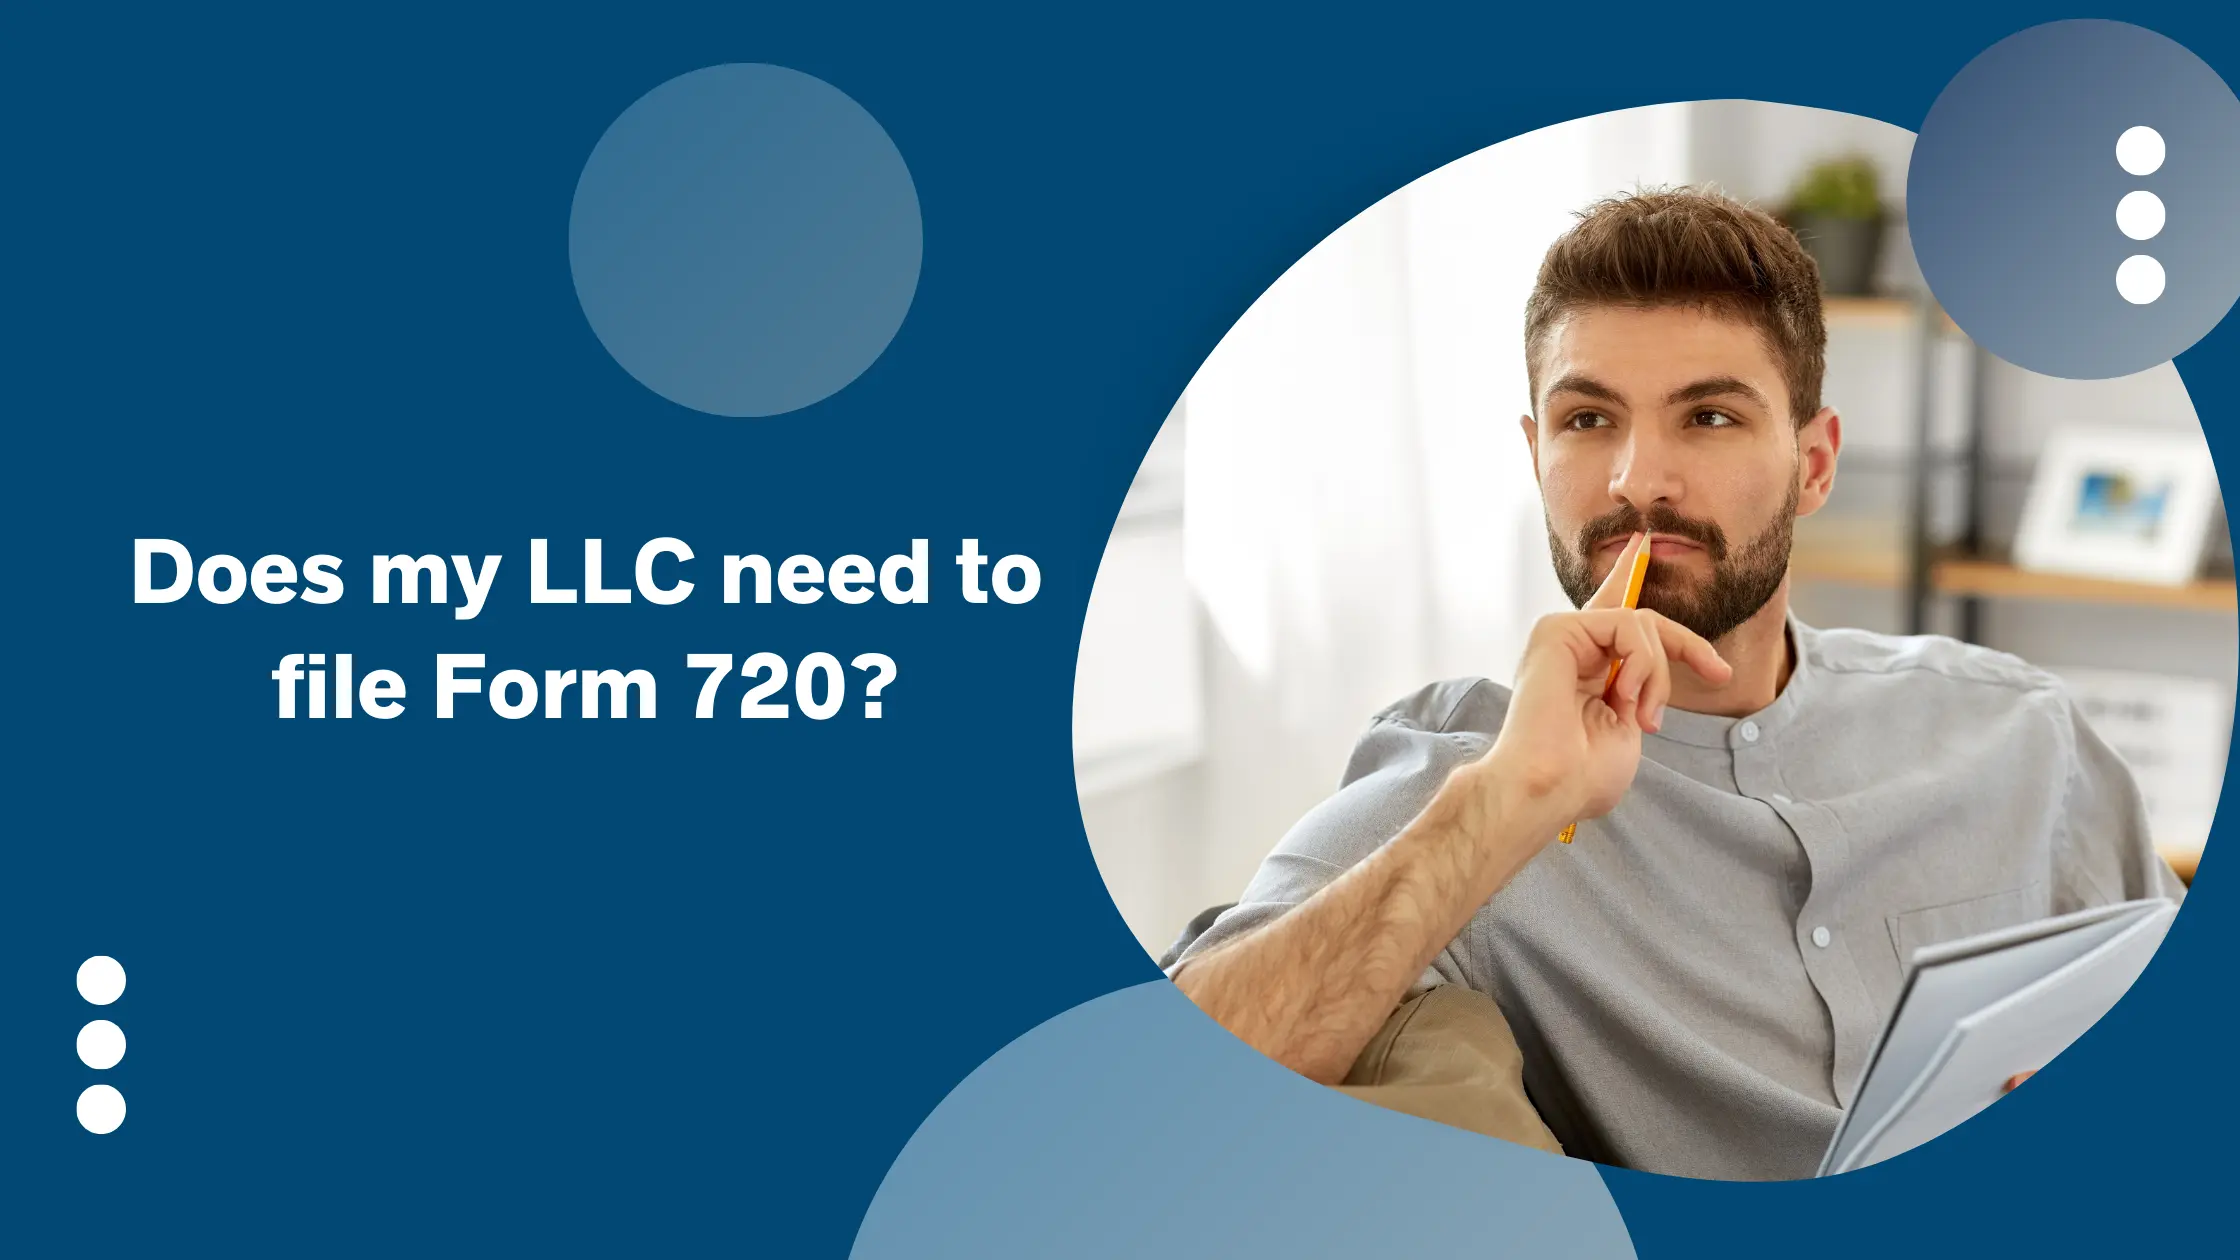 Does My LLC Need to File Form 720